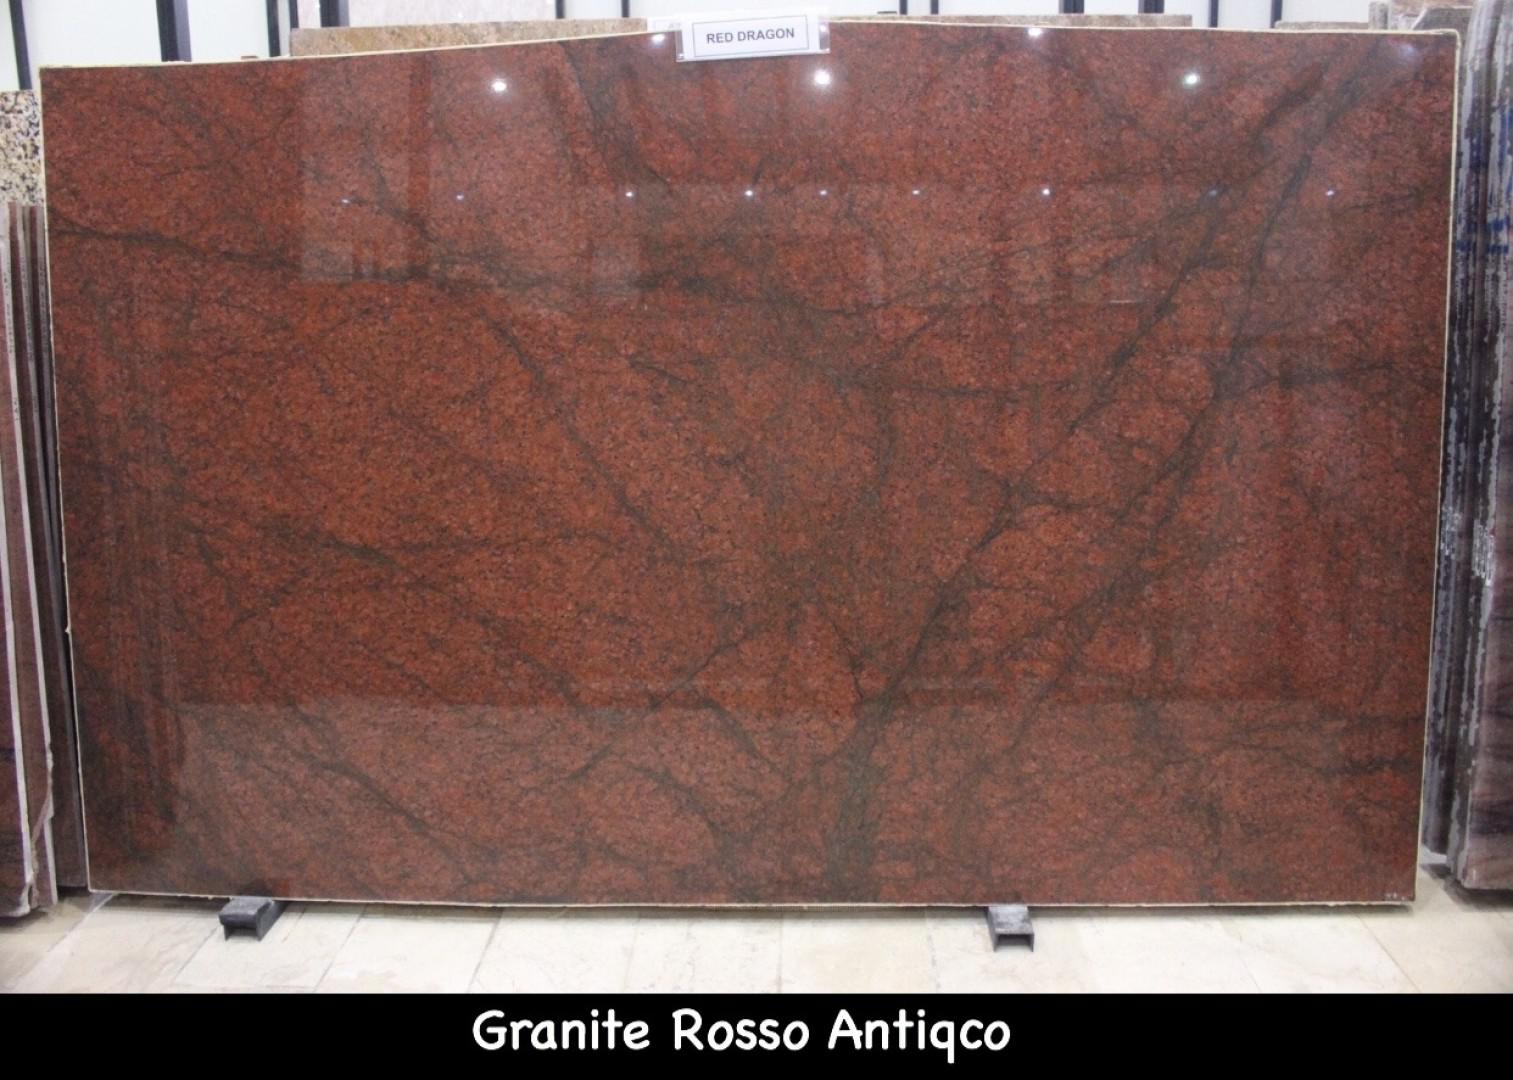 Granit Rosso Antiqco from JSP